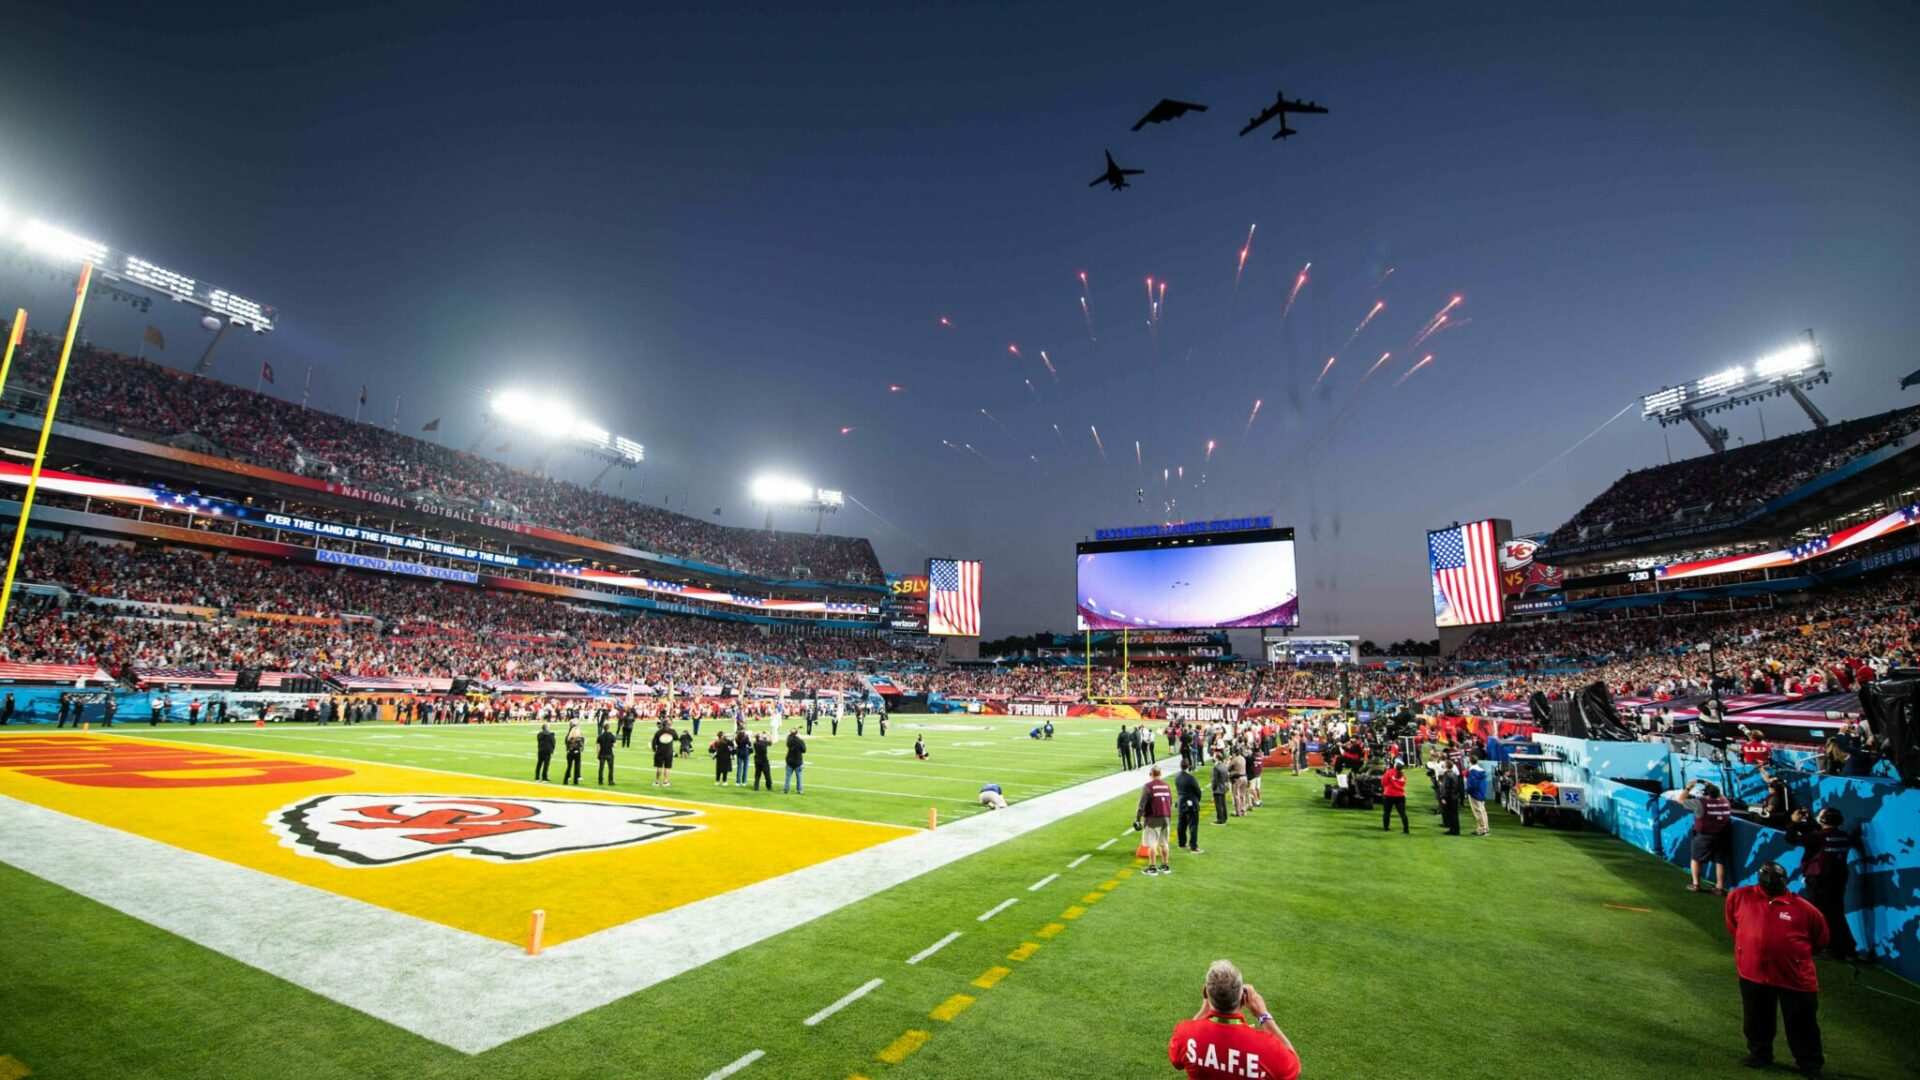 The military took their own pics/vids of the Super Bowl bomber flyover – here they are